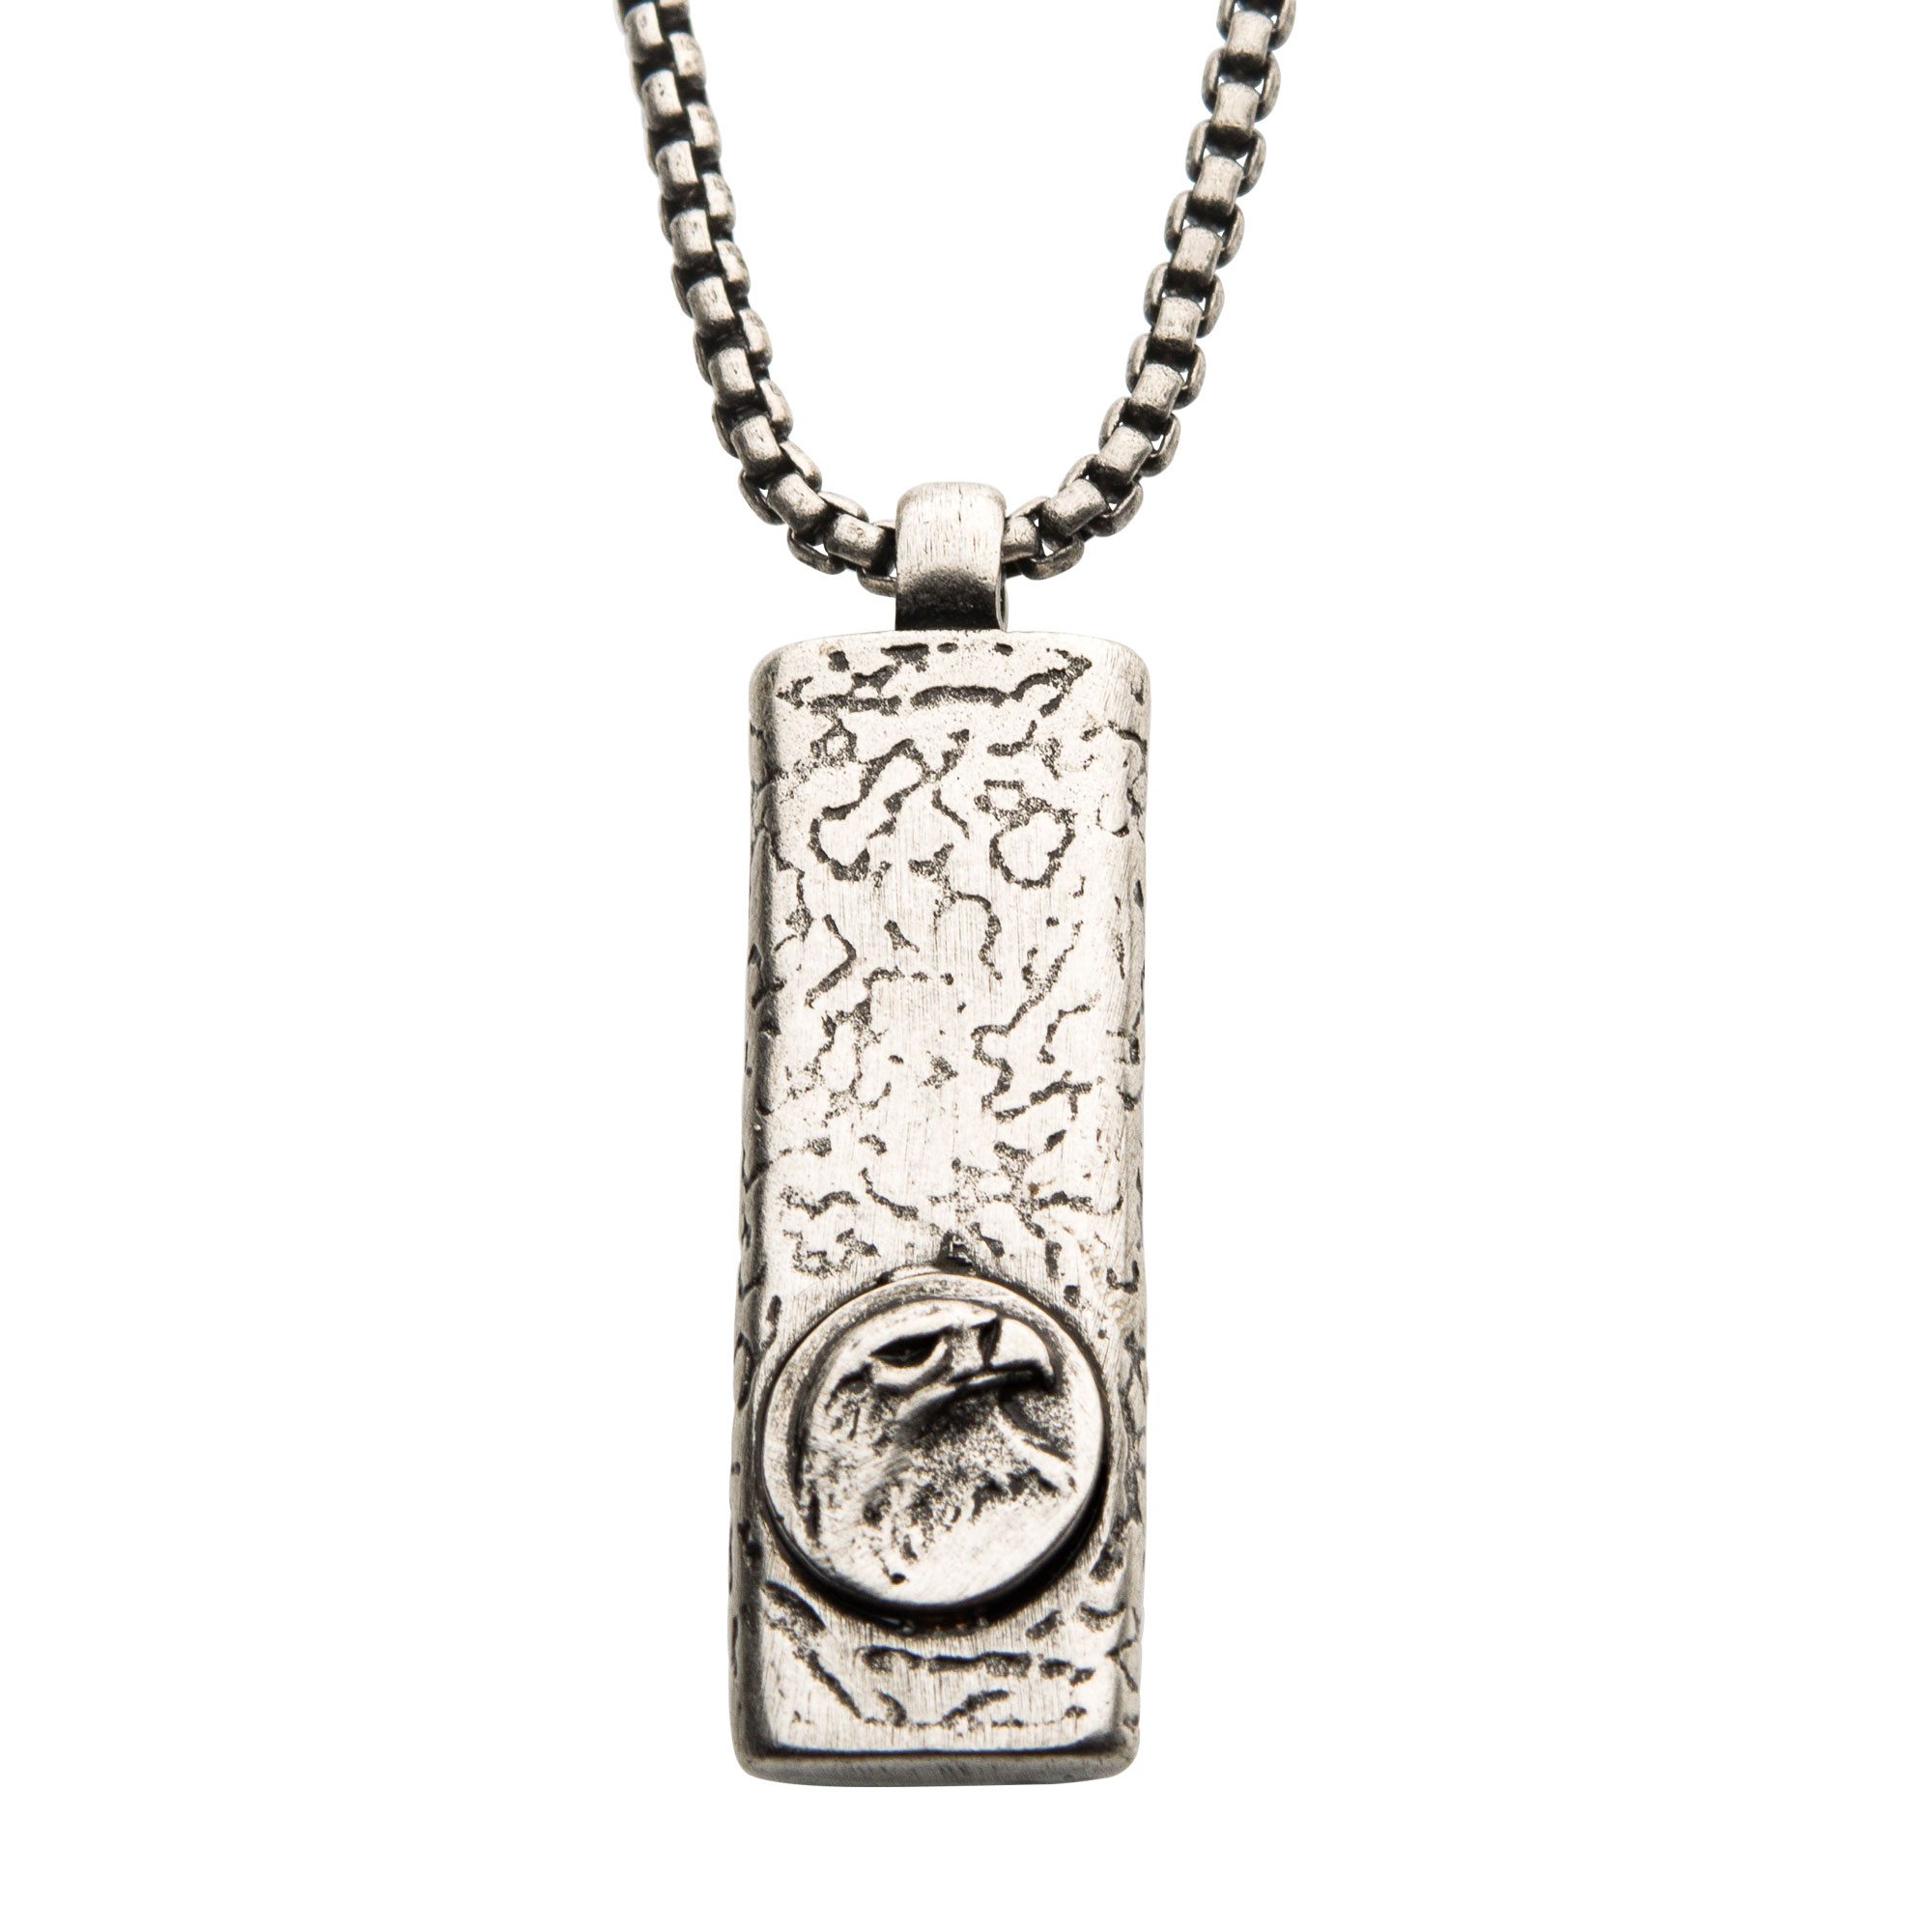 Stainless Steel Silver Plated Dog Tag Pendant with Eagle Head Inlay, with Steel Box Chain K. Martin Jeweler Dodge City, KS